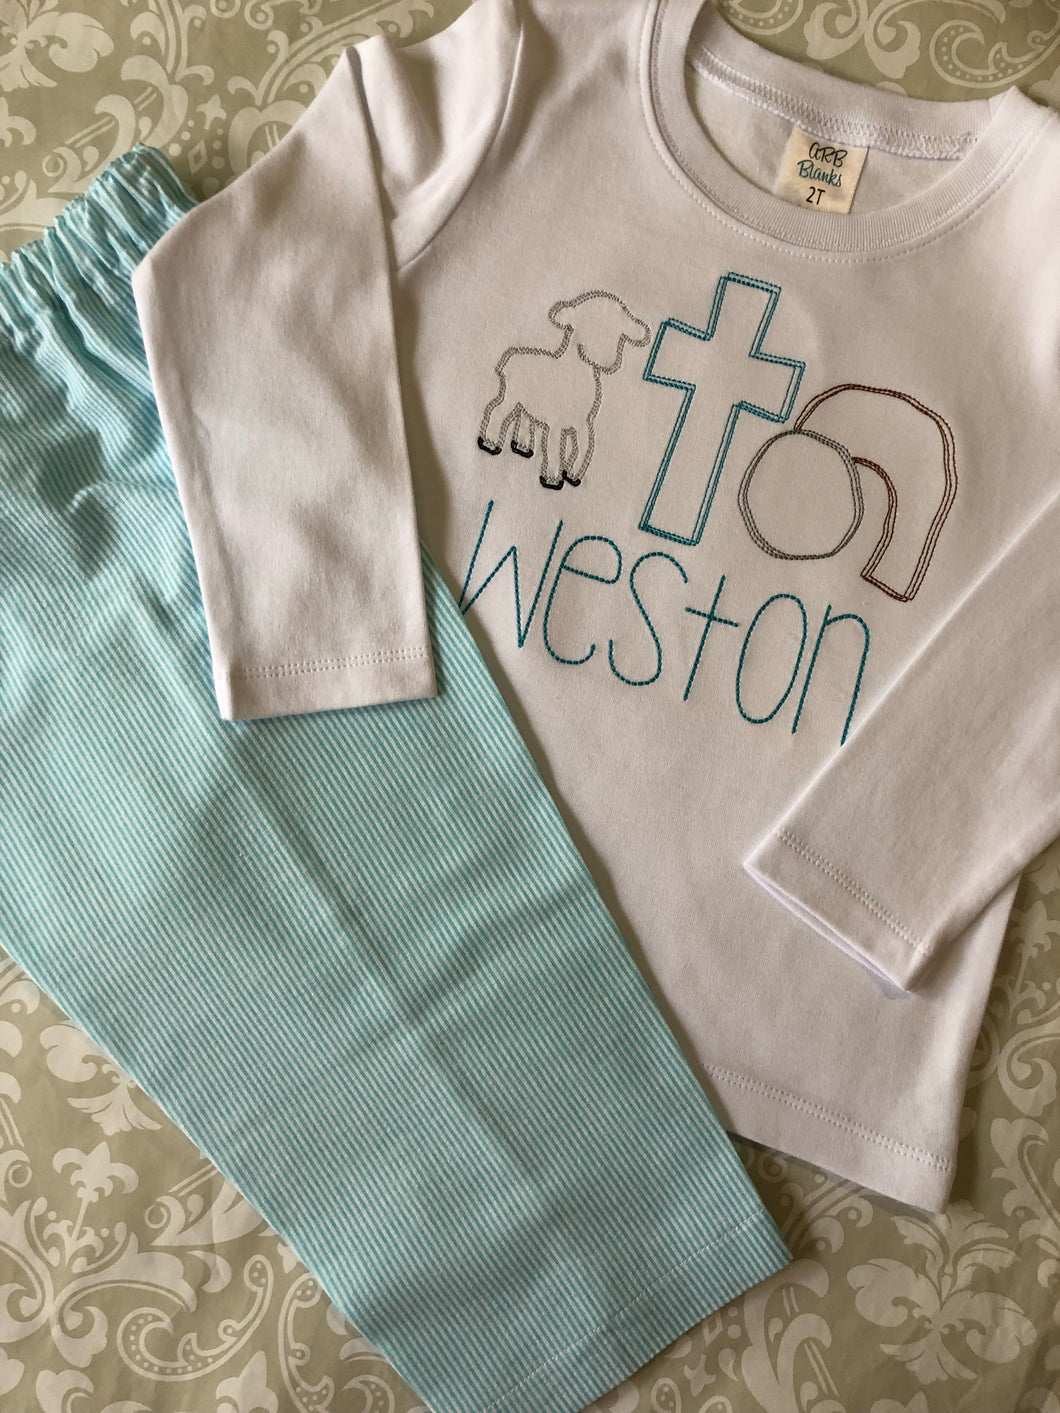 Boys Christian Easter outfit